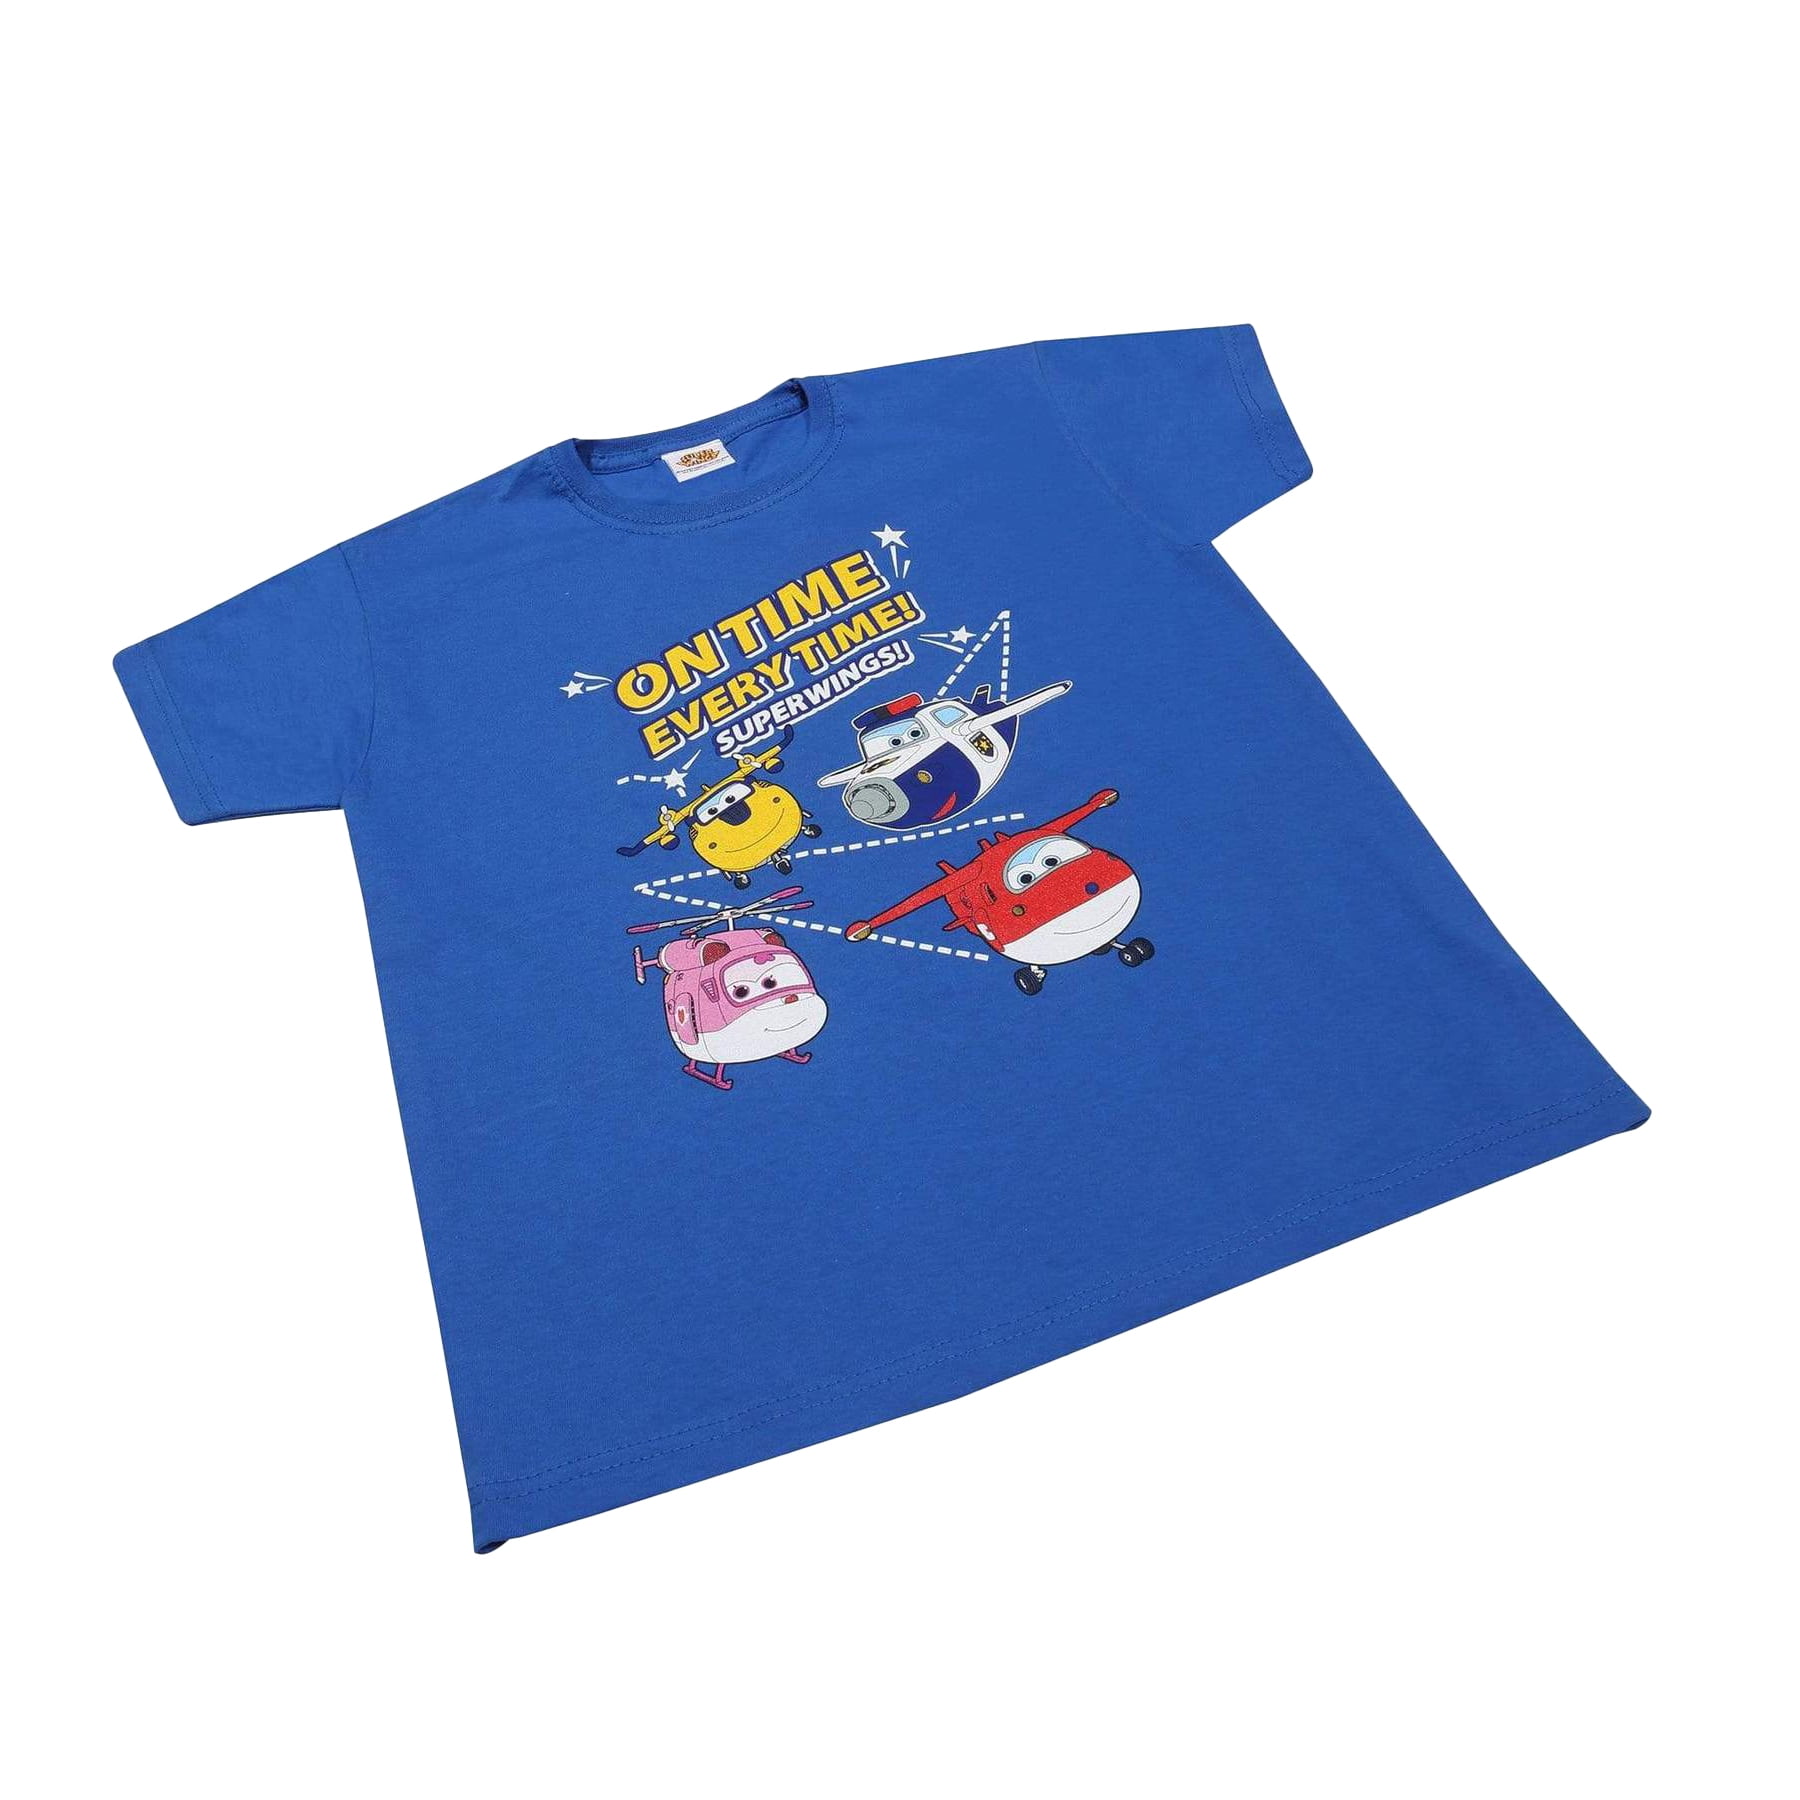 Boys Super Wings T-shirt Kids New 100% Cotton Tee Top Blue Ages 2 3 4 5 6 Years 